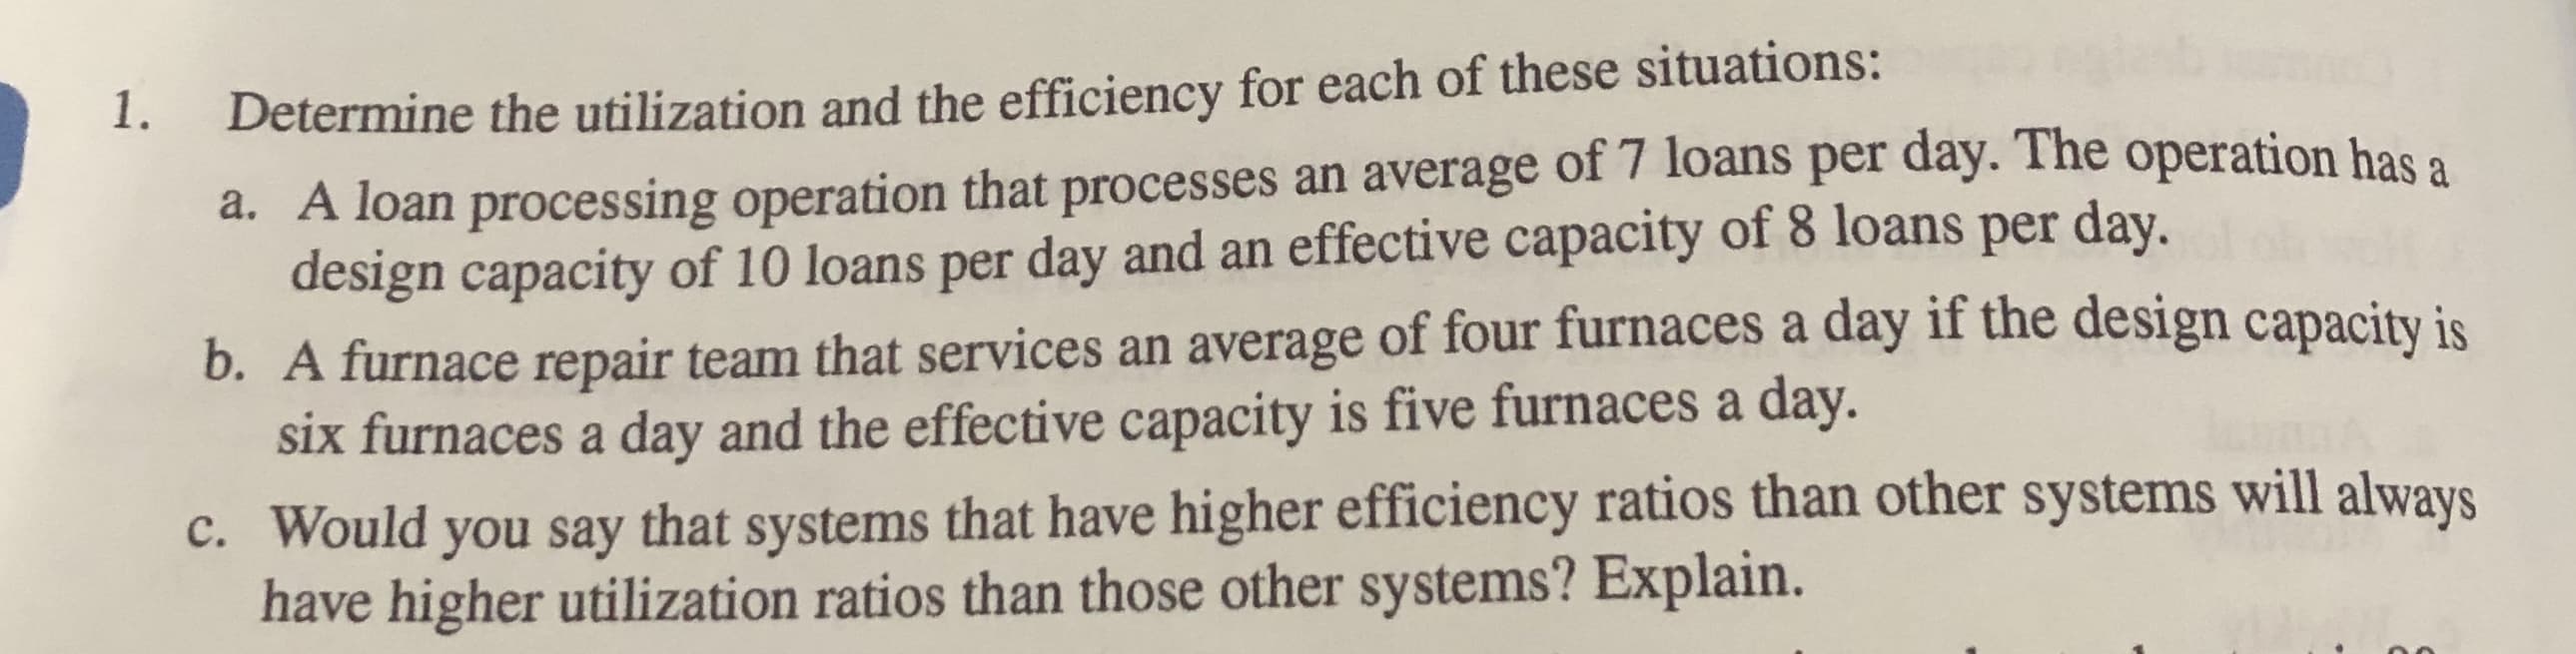 1.
Determine the utilization and the efficiency for each of these situa
a. A loan processing operation that processes an average of 7 loàns per day. The operation has a
design capacity of 10 loans per day and an effective capacity of 8 loans per day.
b. A furnace repair team that services an average of four furnaces a day if the design capacity is
six furnaces a day and the effective capacity is five furnaces a day.
c. Would you say that systems that have higher efficiency ratios than other systems will always
have higher utilization ratios than those other systems? Explain.
